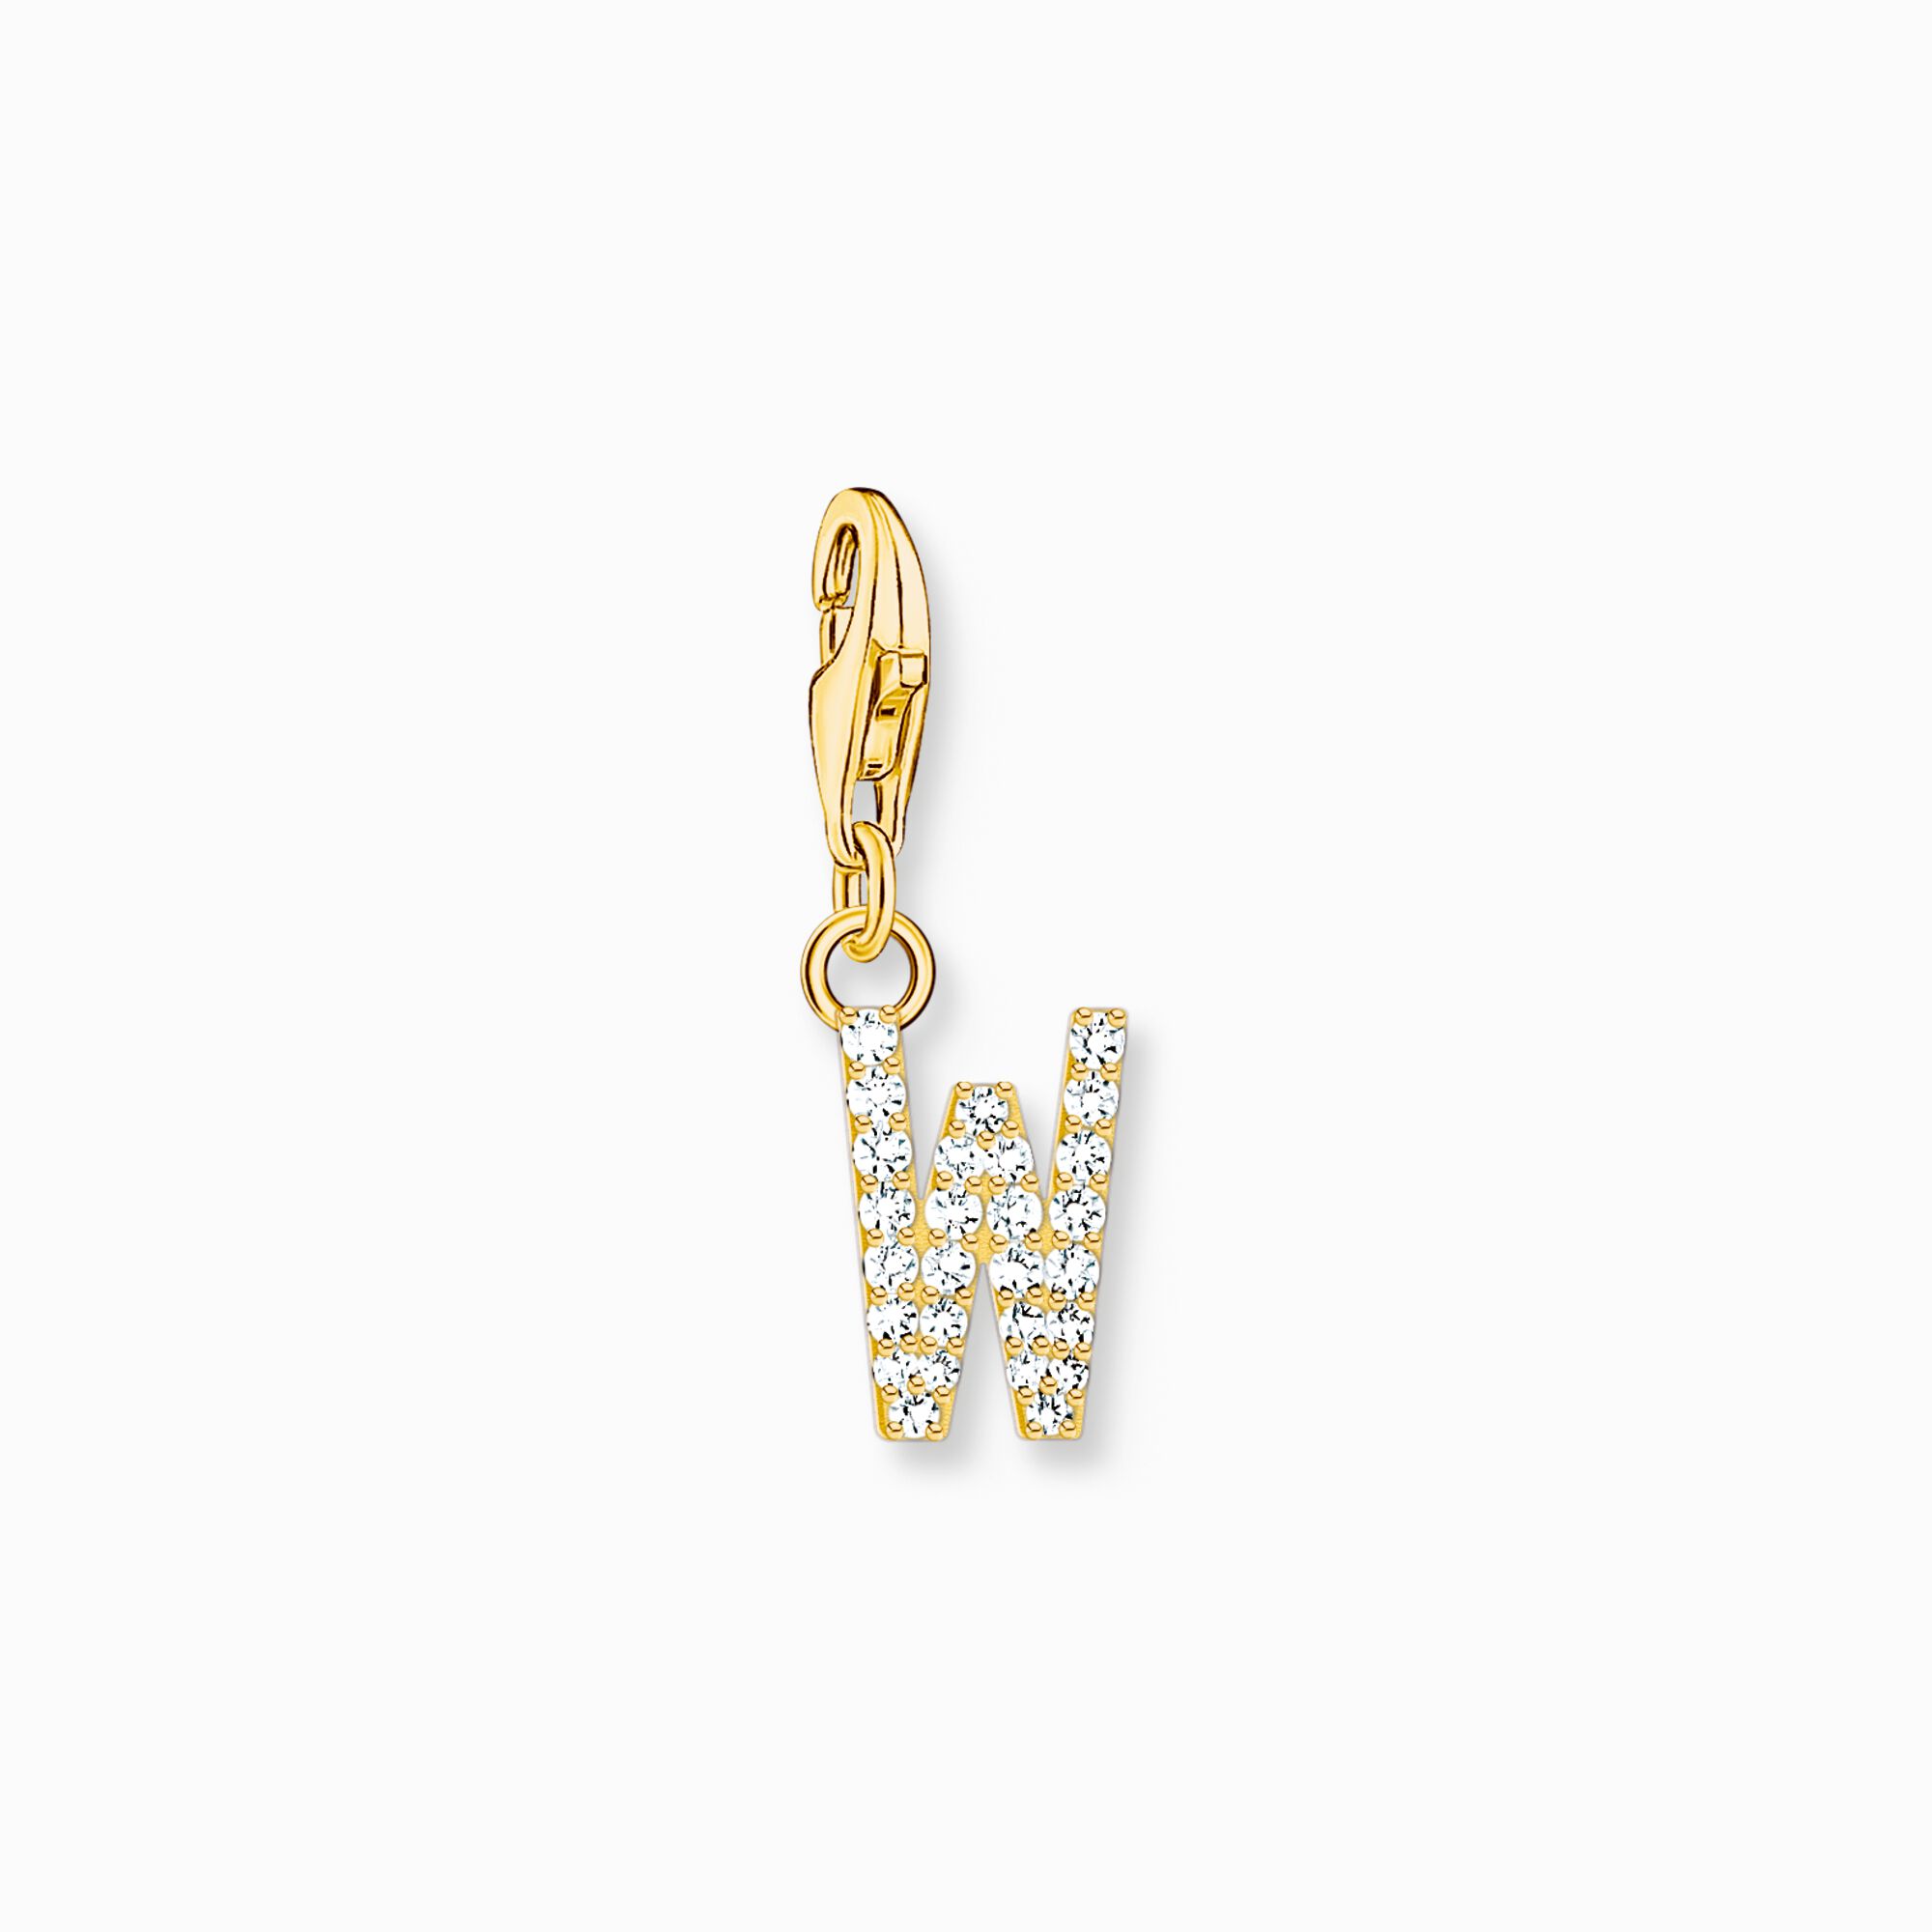 Charm pendant letter W with white stones gold plated from the Charm Club collection in the THOMAS SABO online store